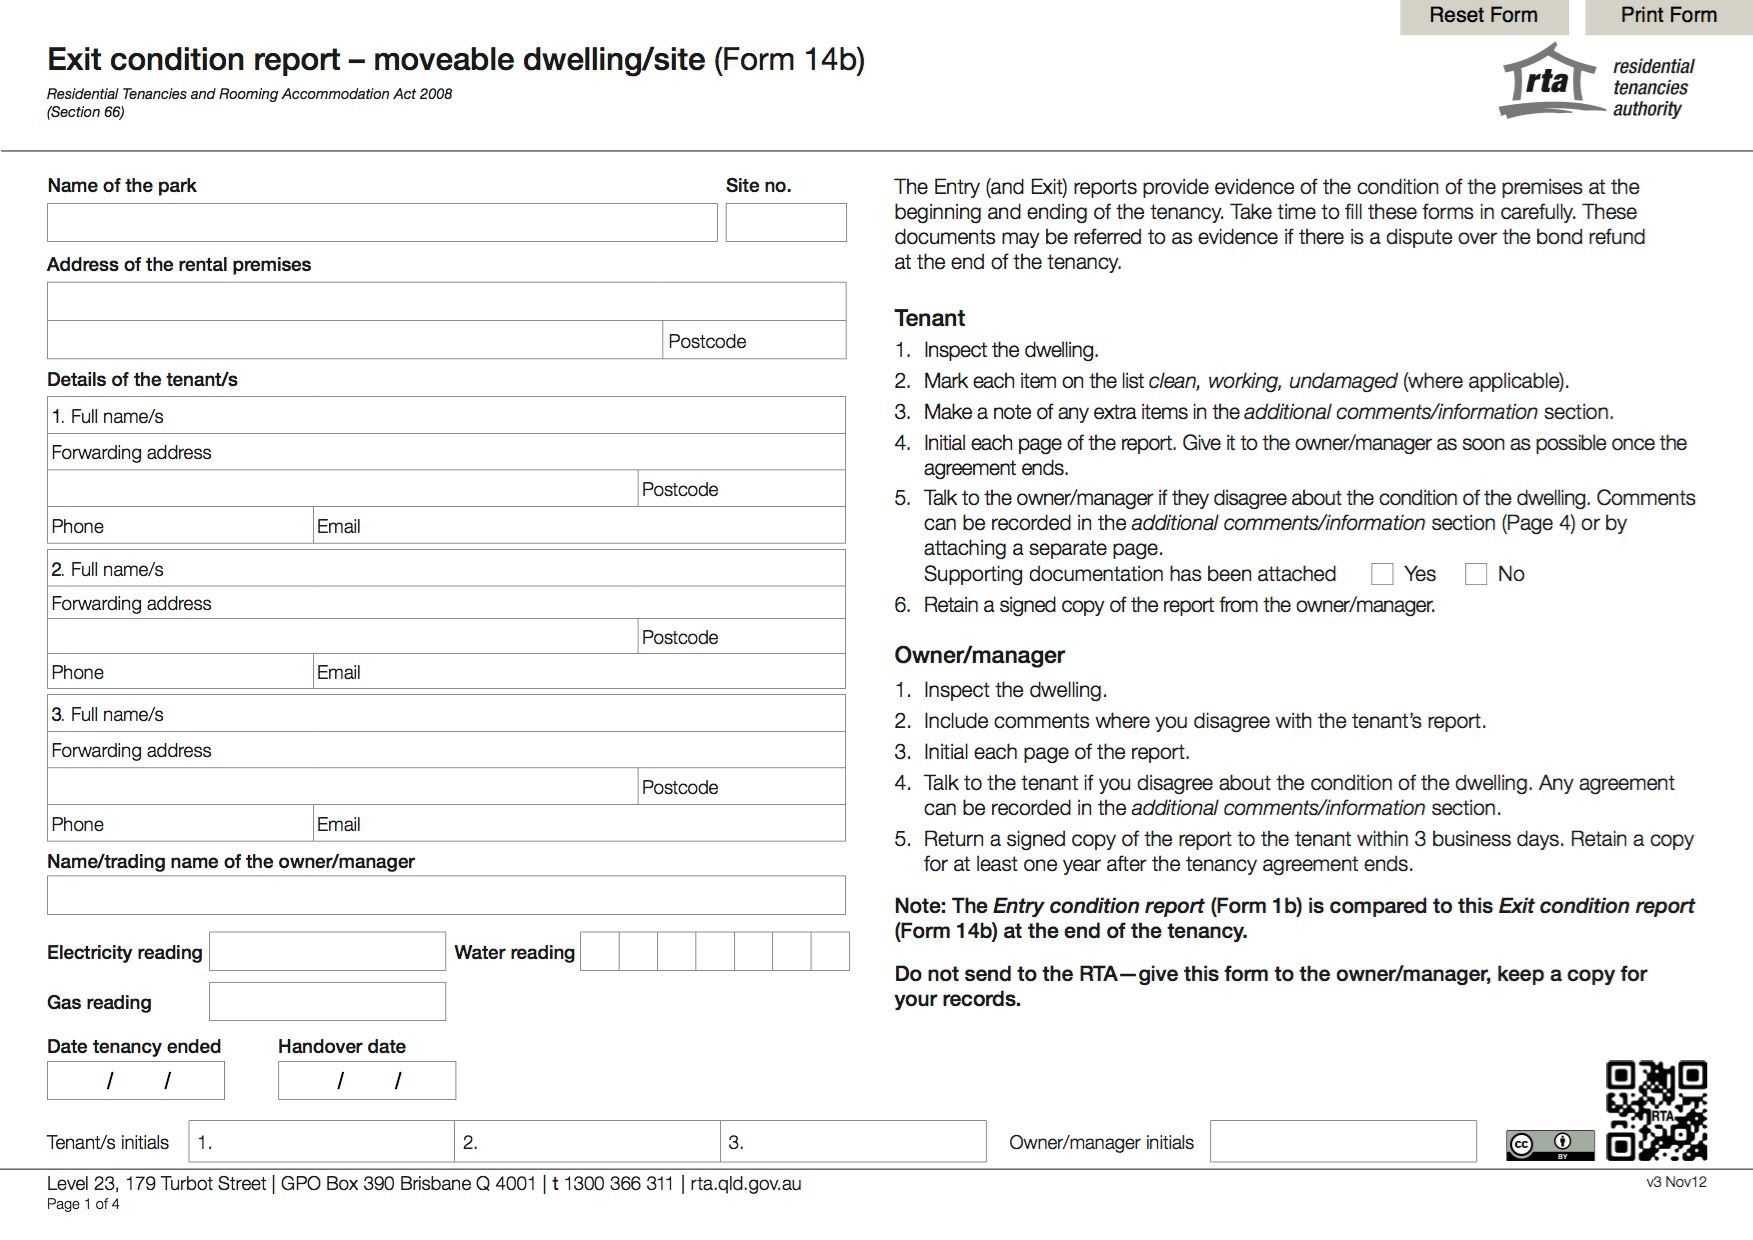 Incident Report Form Template Qld ] – Michael Smith News 17 Within Incident Report Form Template Qld